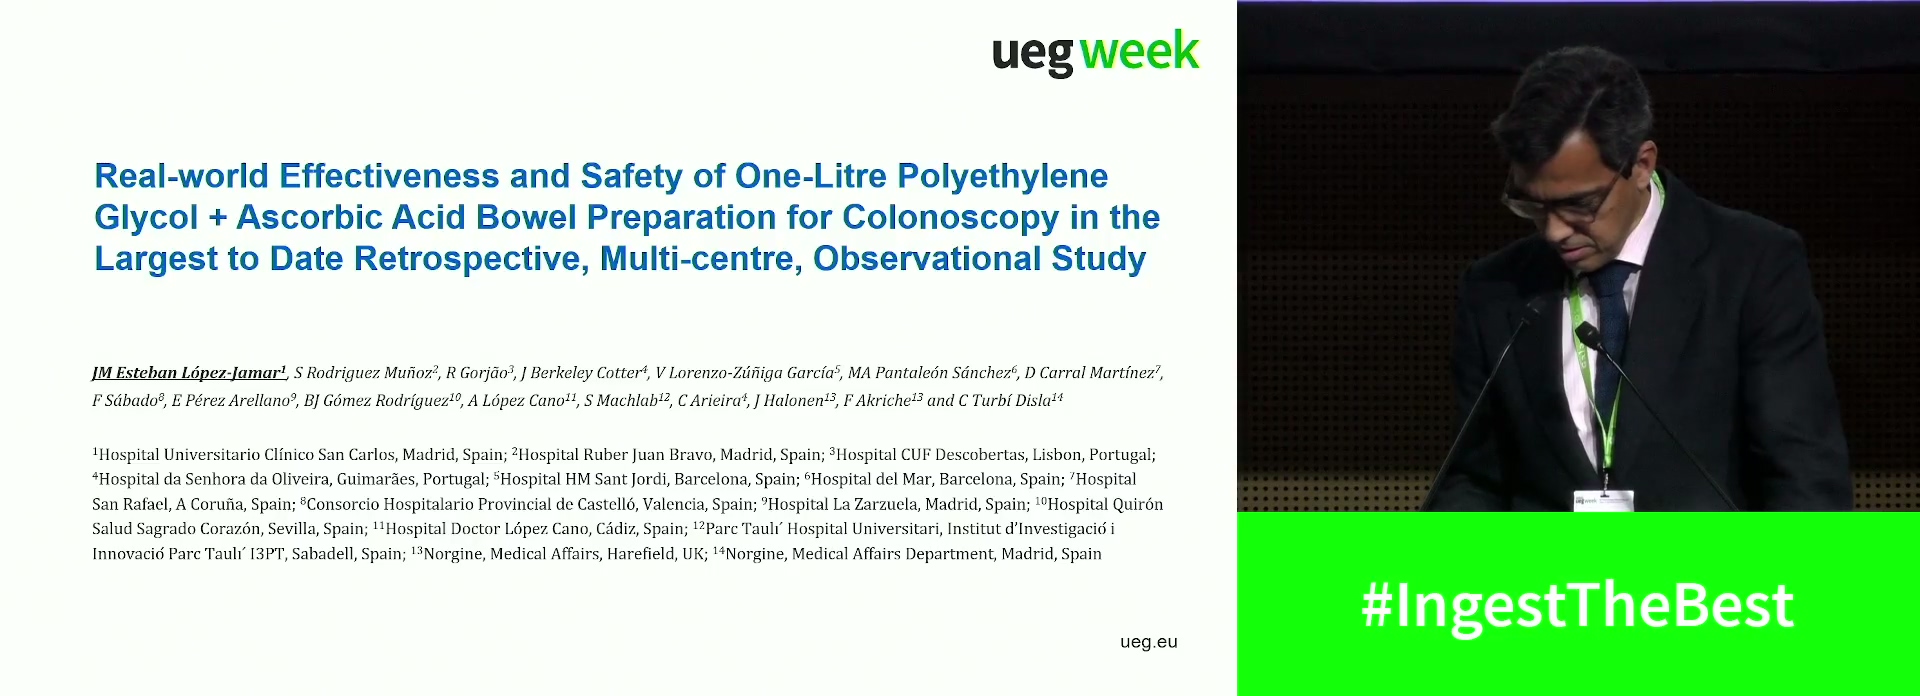 REAL-WORLD EFFECTIVENESS AND SAFETY OF THE 1L POLYETHYLENE GLYCOL + ASCORBIC ACID BOWEL PREPARATION FOR COLONOSCOPY IN THE LARGEST TO DATE RETROSPECTIVE, MULTI-CENTRE, OBSERVATIONAL STUDY